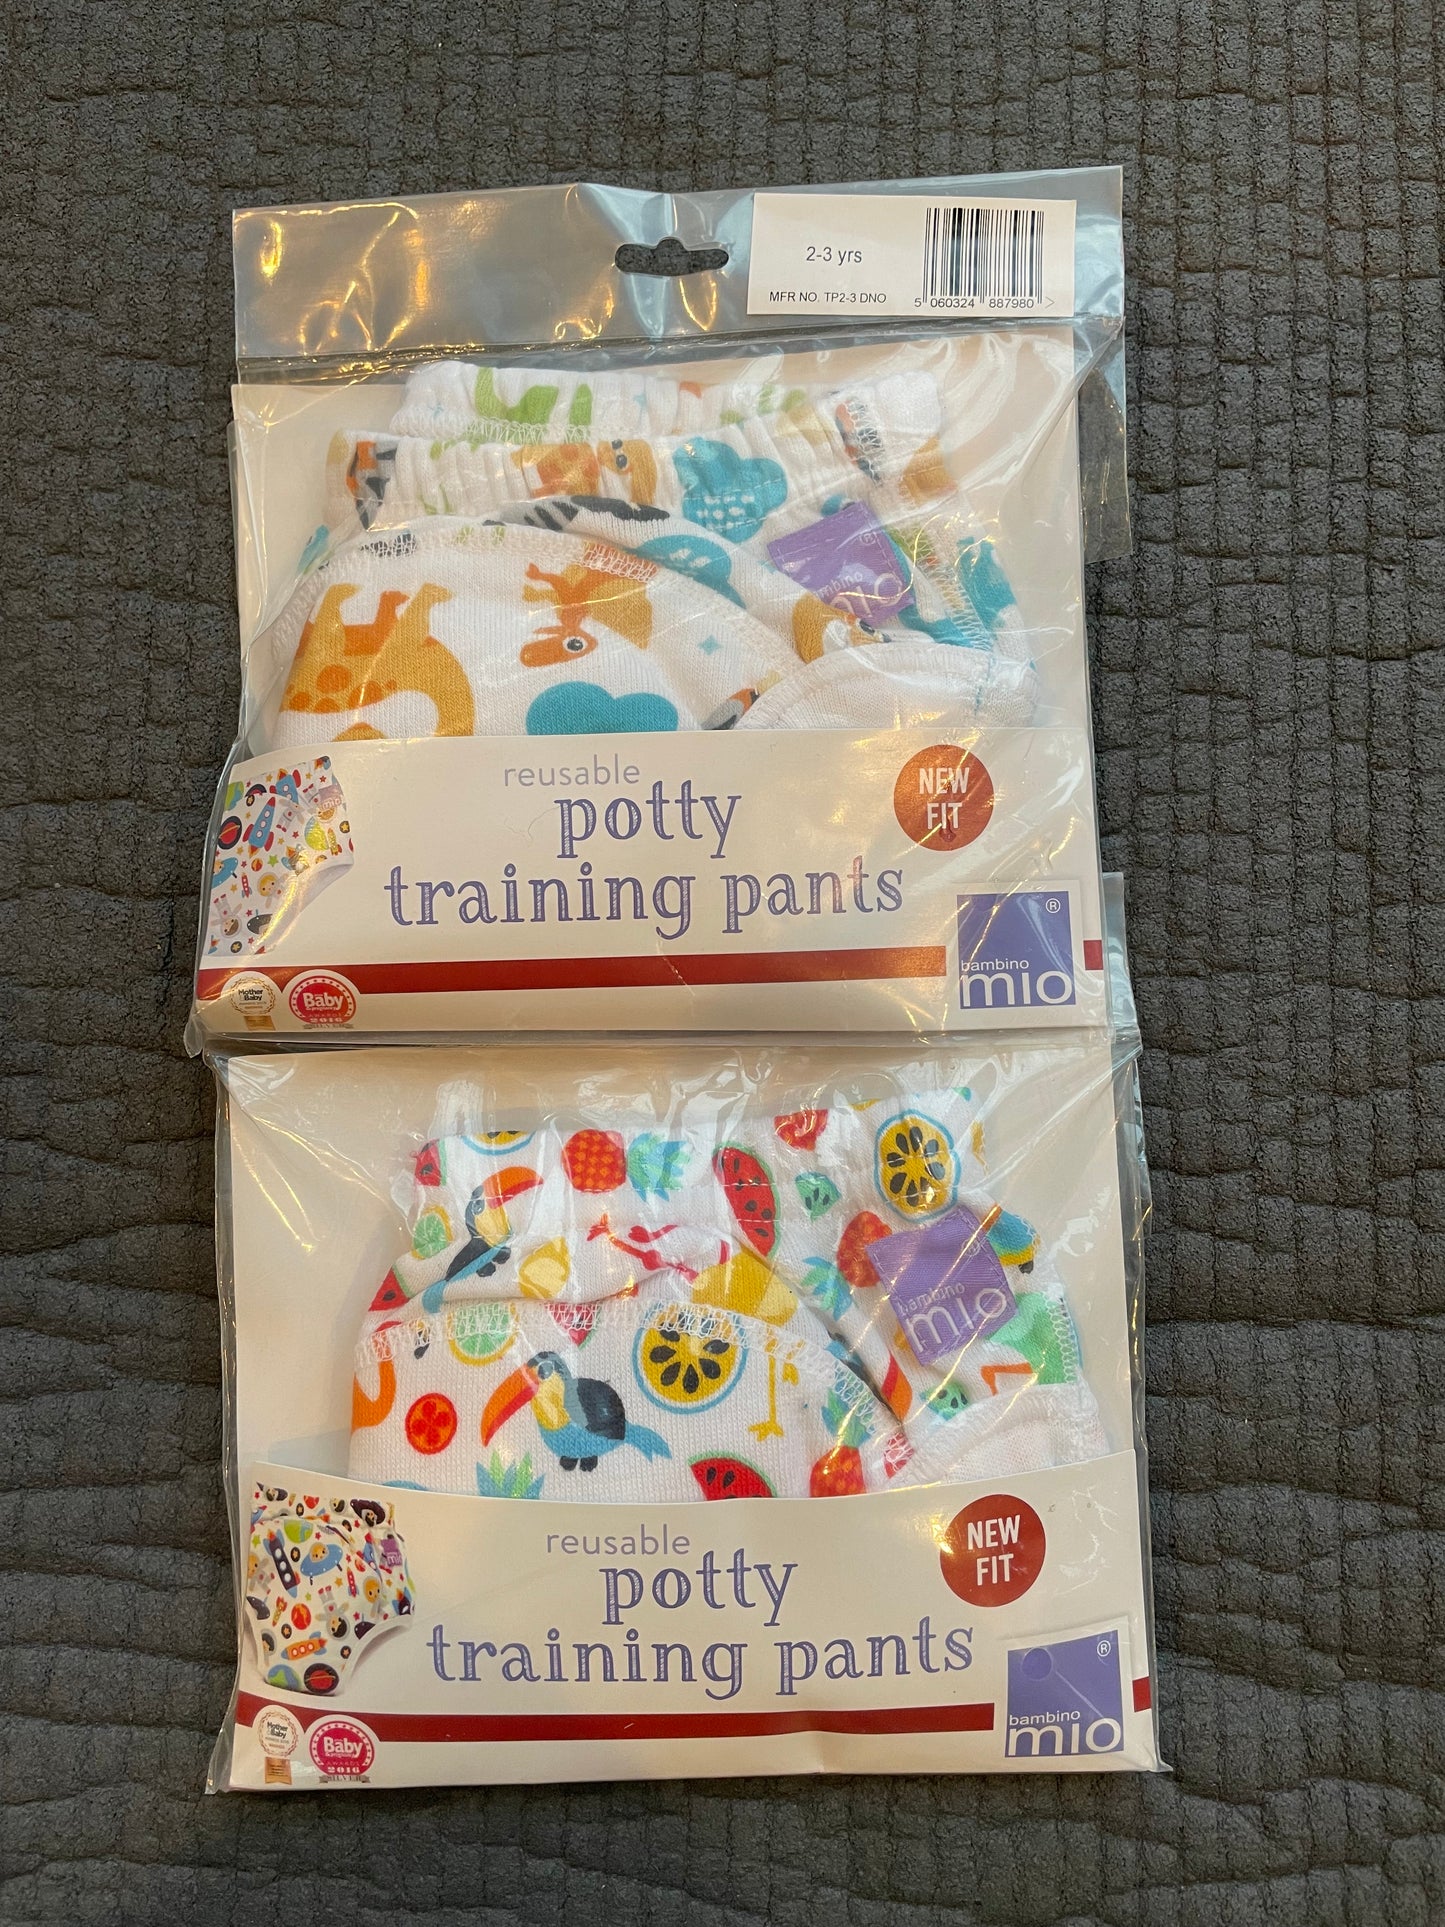 Mio reusable potty training pants, brand new in package